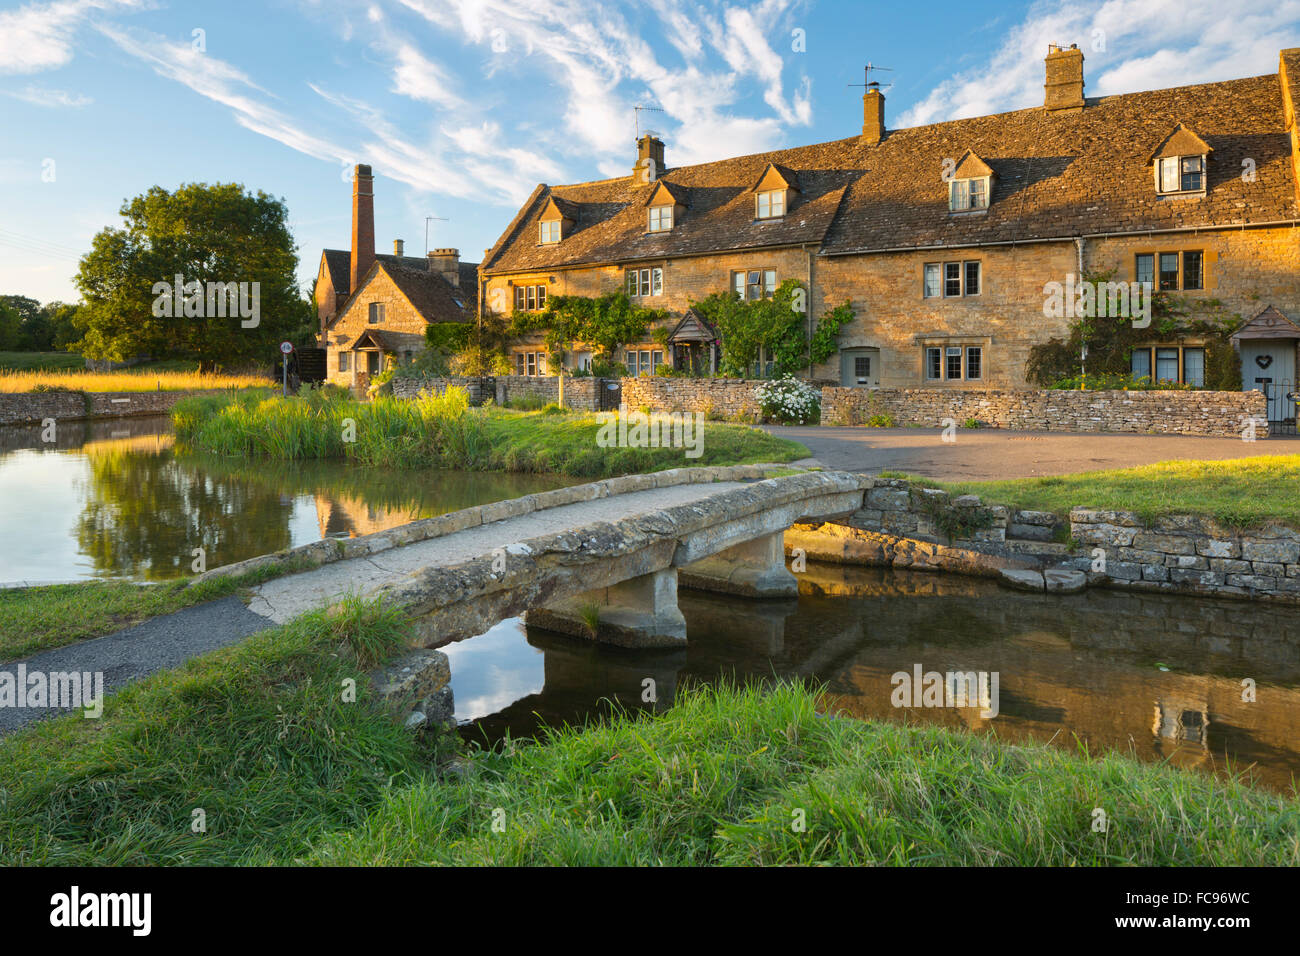 Stone bridge and cotswold cottages on River Eye, Lower Slaughter, Cotswolds, Gloucestershire, England, United Kingdom, Europe Stock Photo